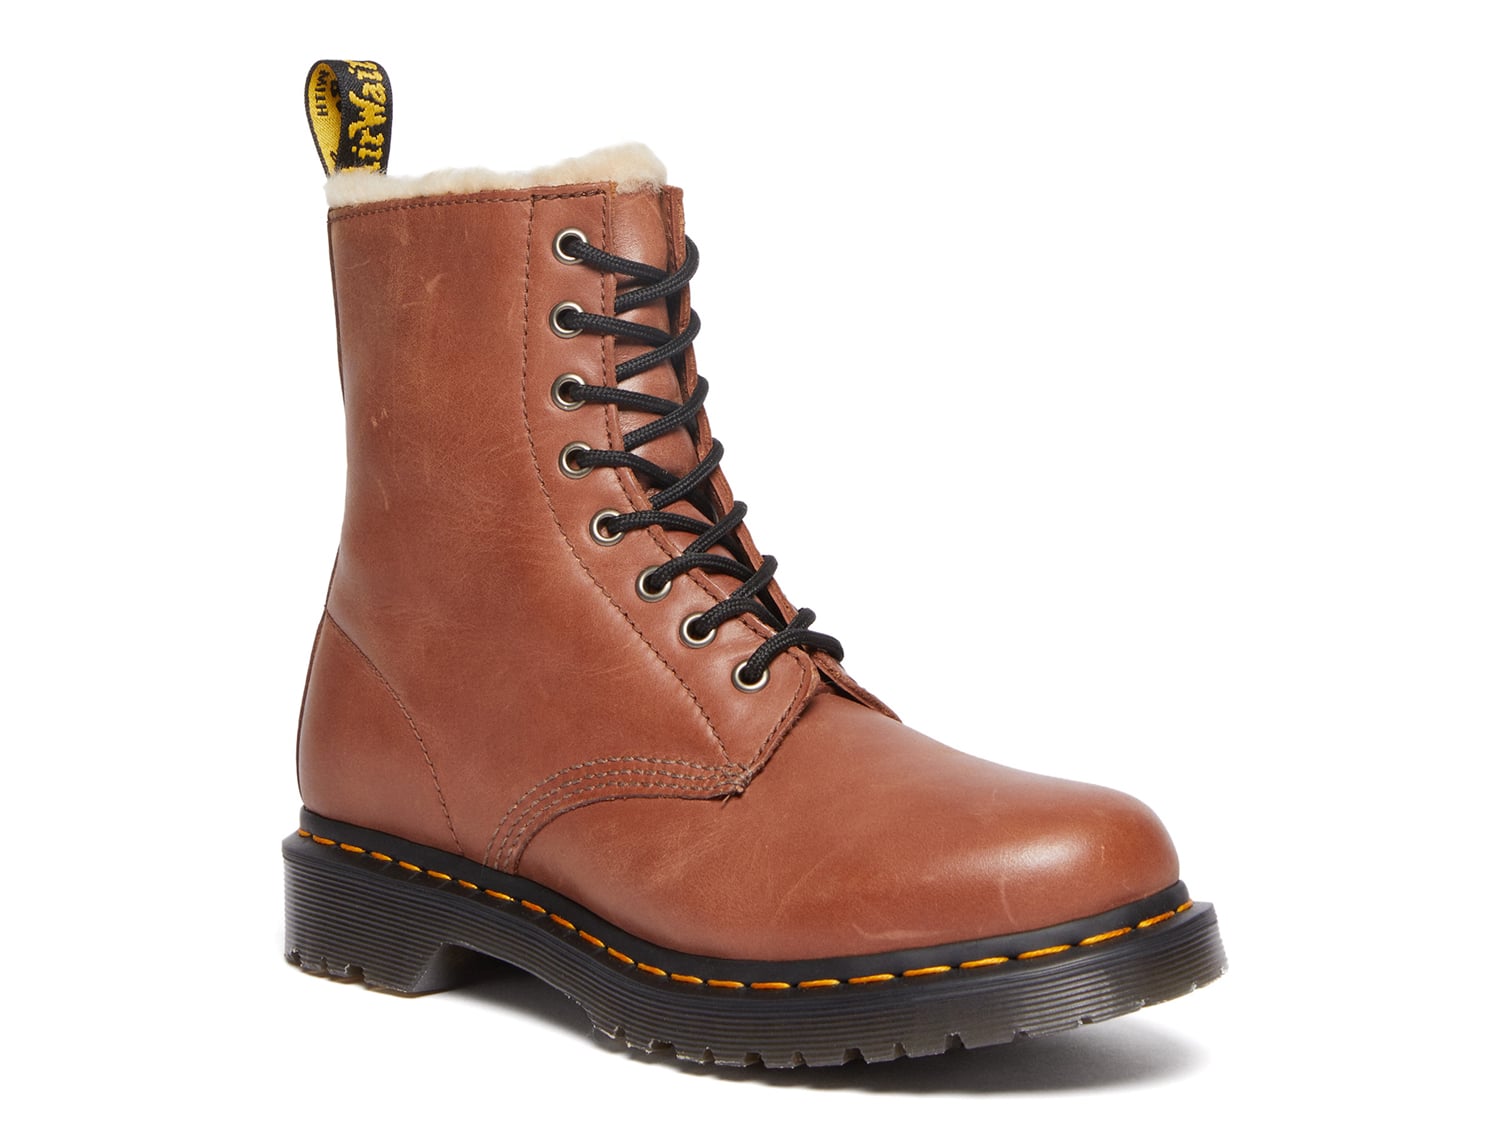 Martens 1460 Serena Boot - Women's Free Shipping | DSW